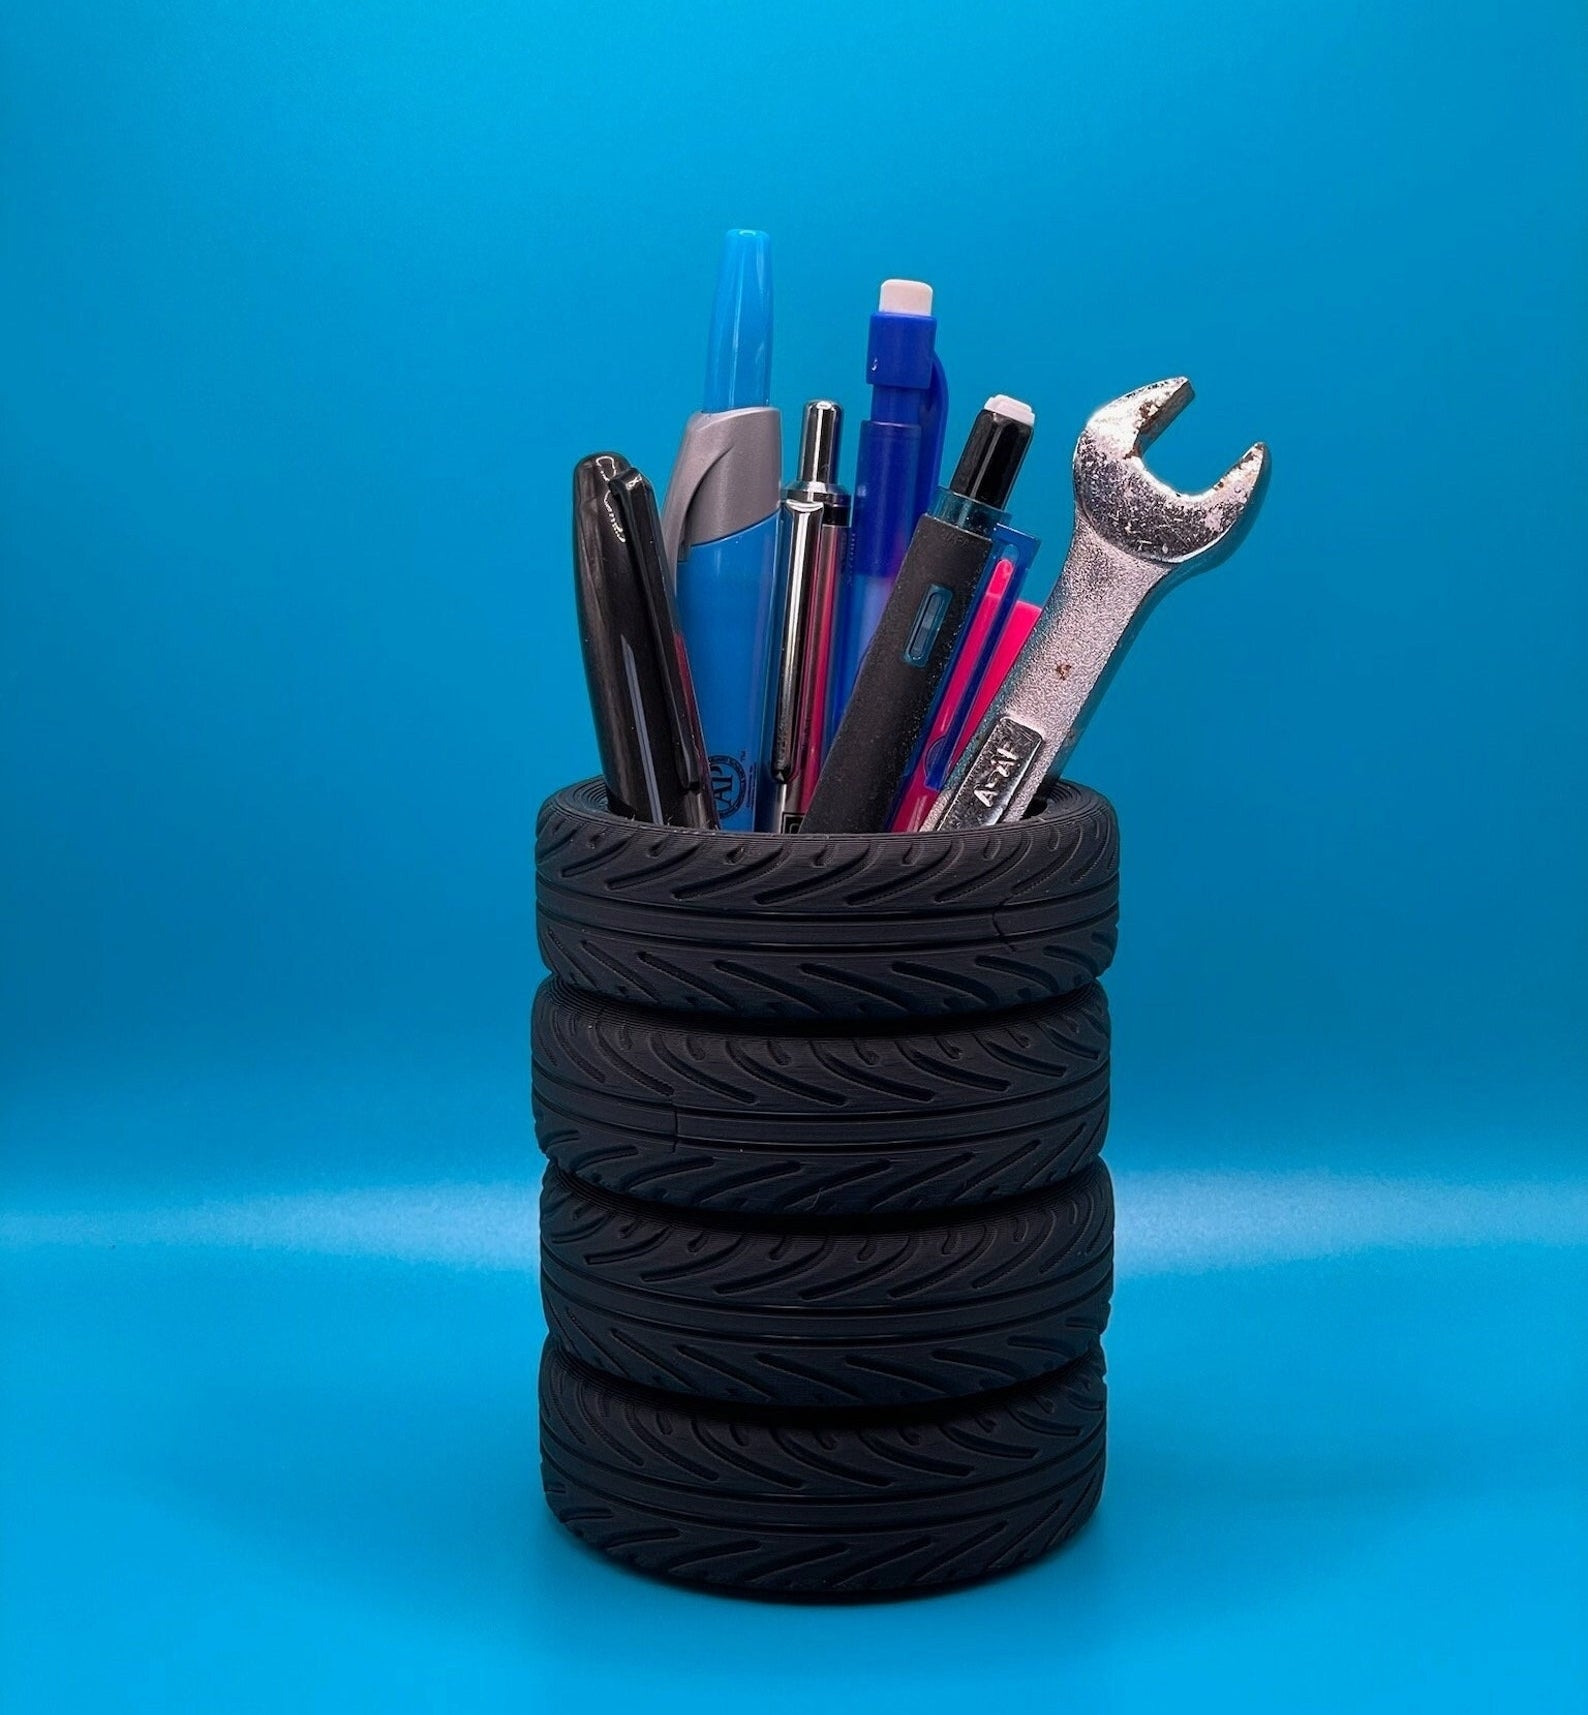 A pen holder made from recycled materials with pens and a wrench inside, demonstrating eco-friendly desk organization options